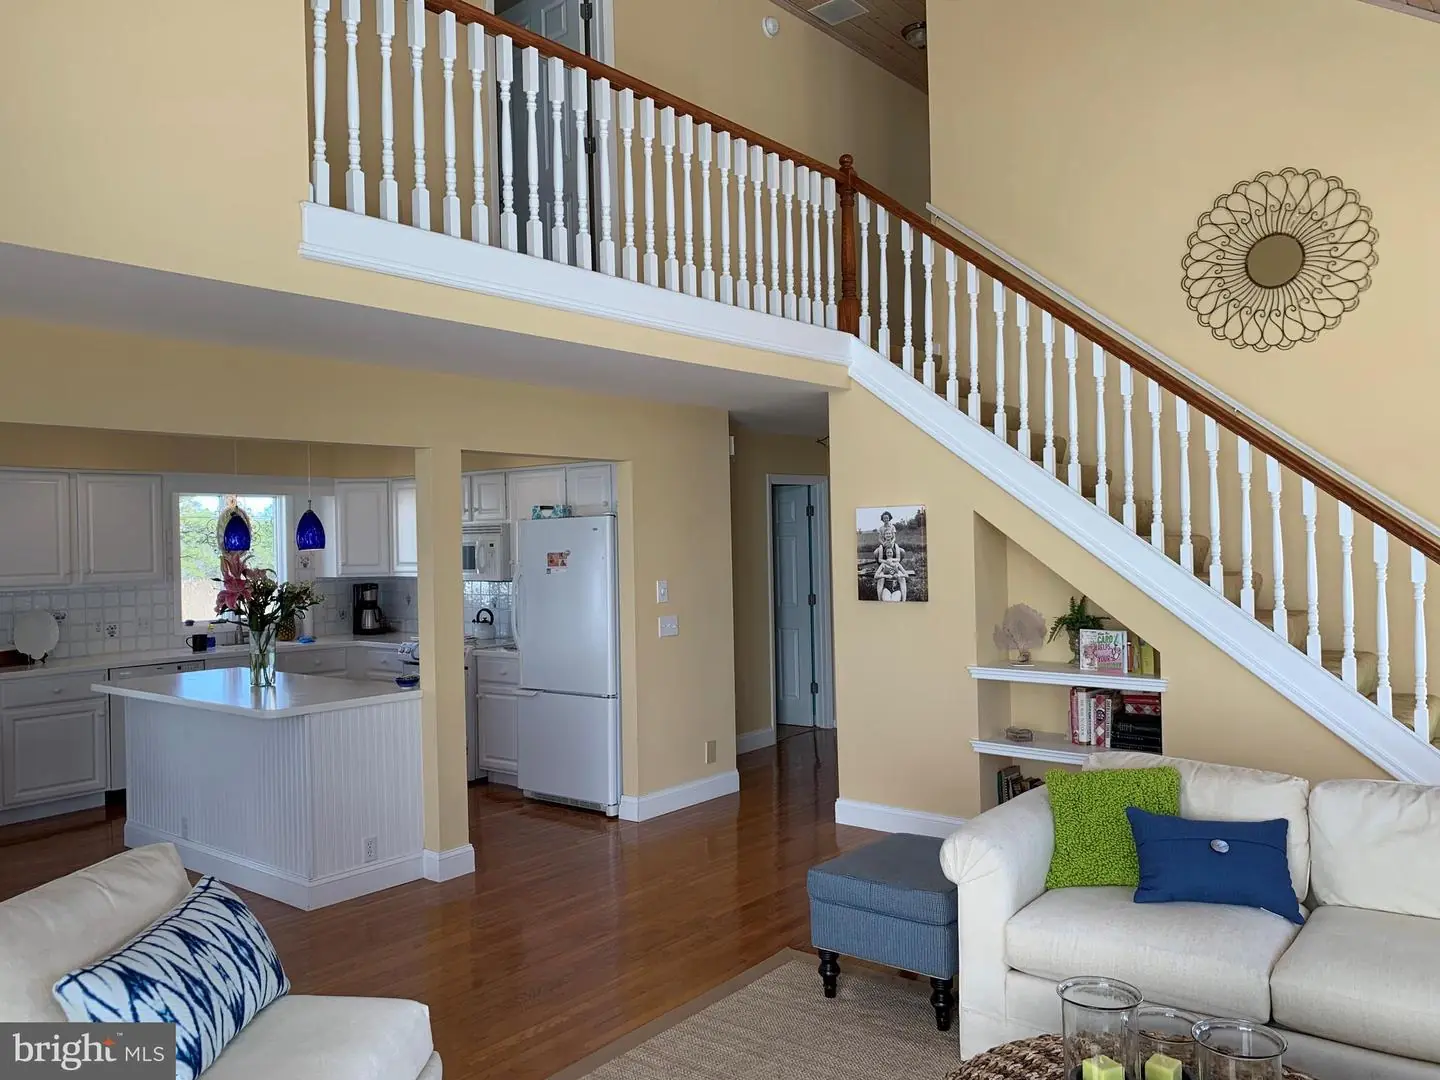 DESU164670-304207560345-2021-07-17-02-03-16 35199 Hassell Ave | Bethany Beach, DE Real Estate For Sale | MLS# Desu164670  - 1st Choice Properties